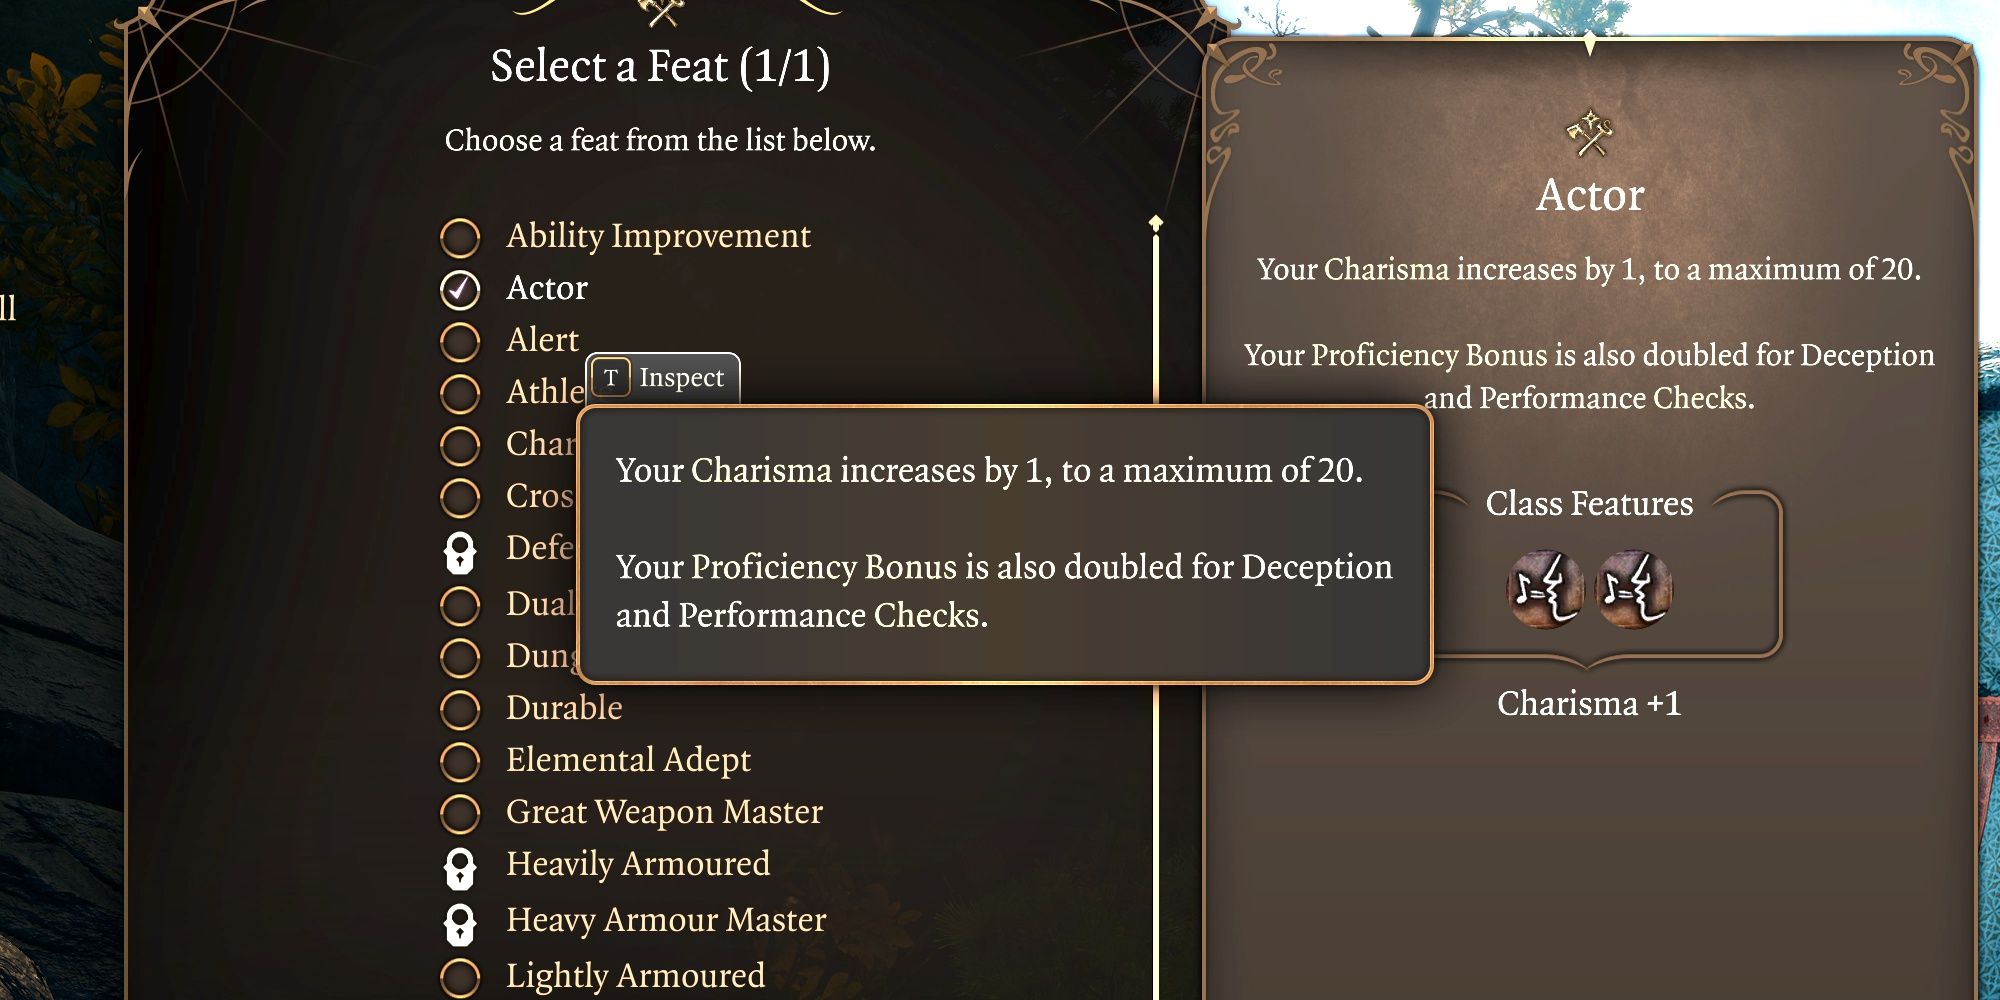 Baldur's Gate 3 Feats list available to Warlocks, with the Actor selected as the best first choice